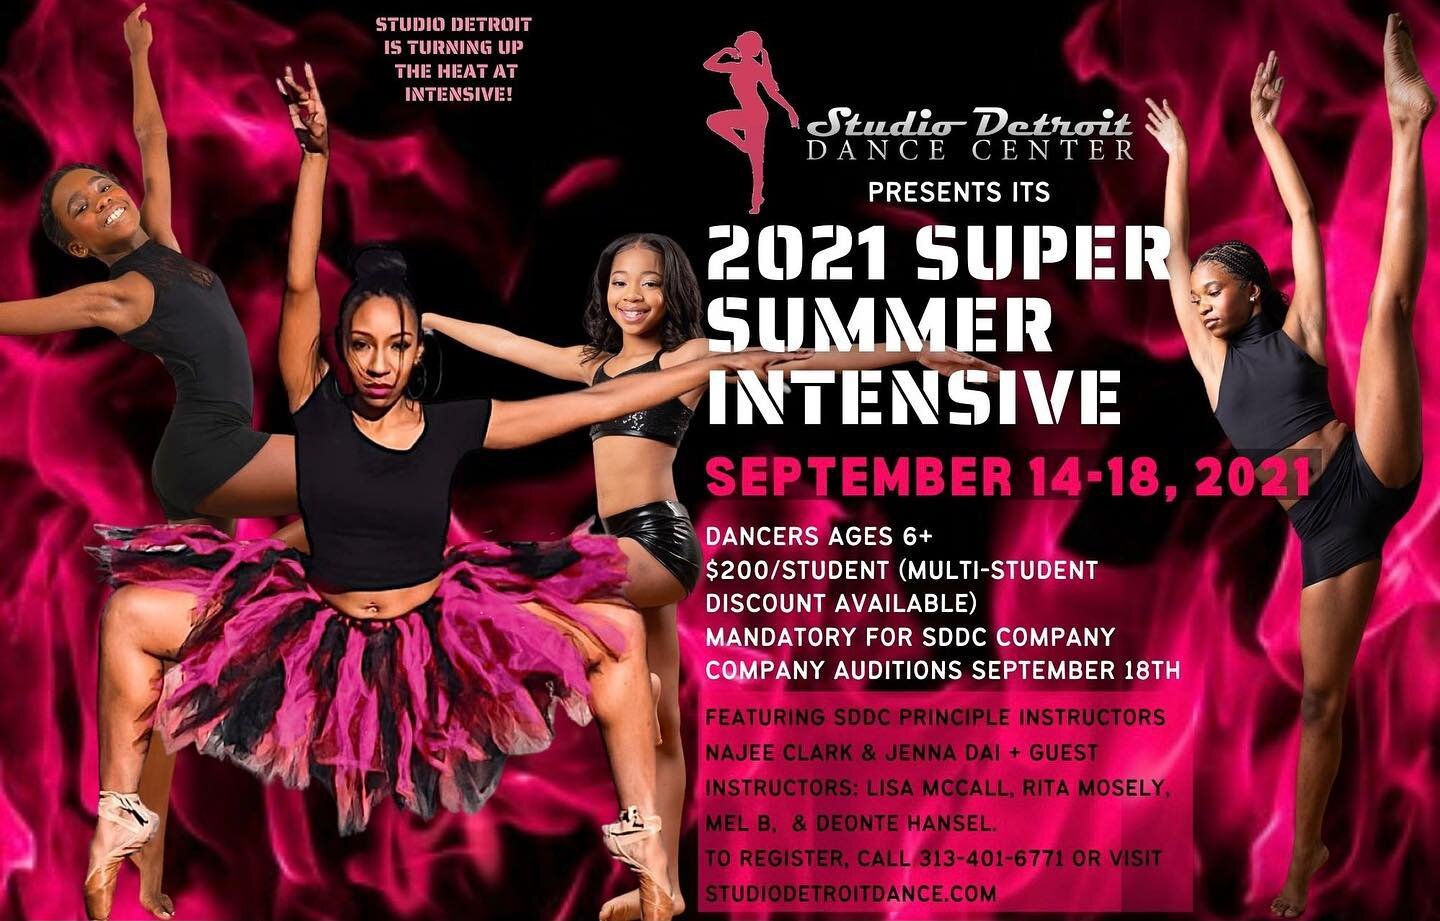 Interested in enrolling in our fall classes or joining our #AwardWinning #DanceCompanies? Prepare by taking our 2021 #SummerDanceIntensive running #September 14-18. This year, we&rsquo;re turning up the heat on #DanceIntensive with our talented core 